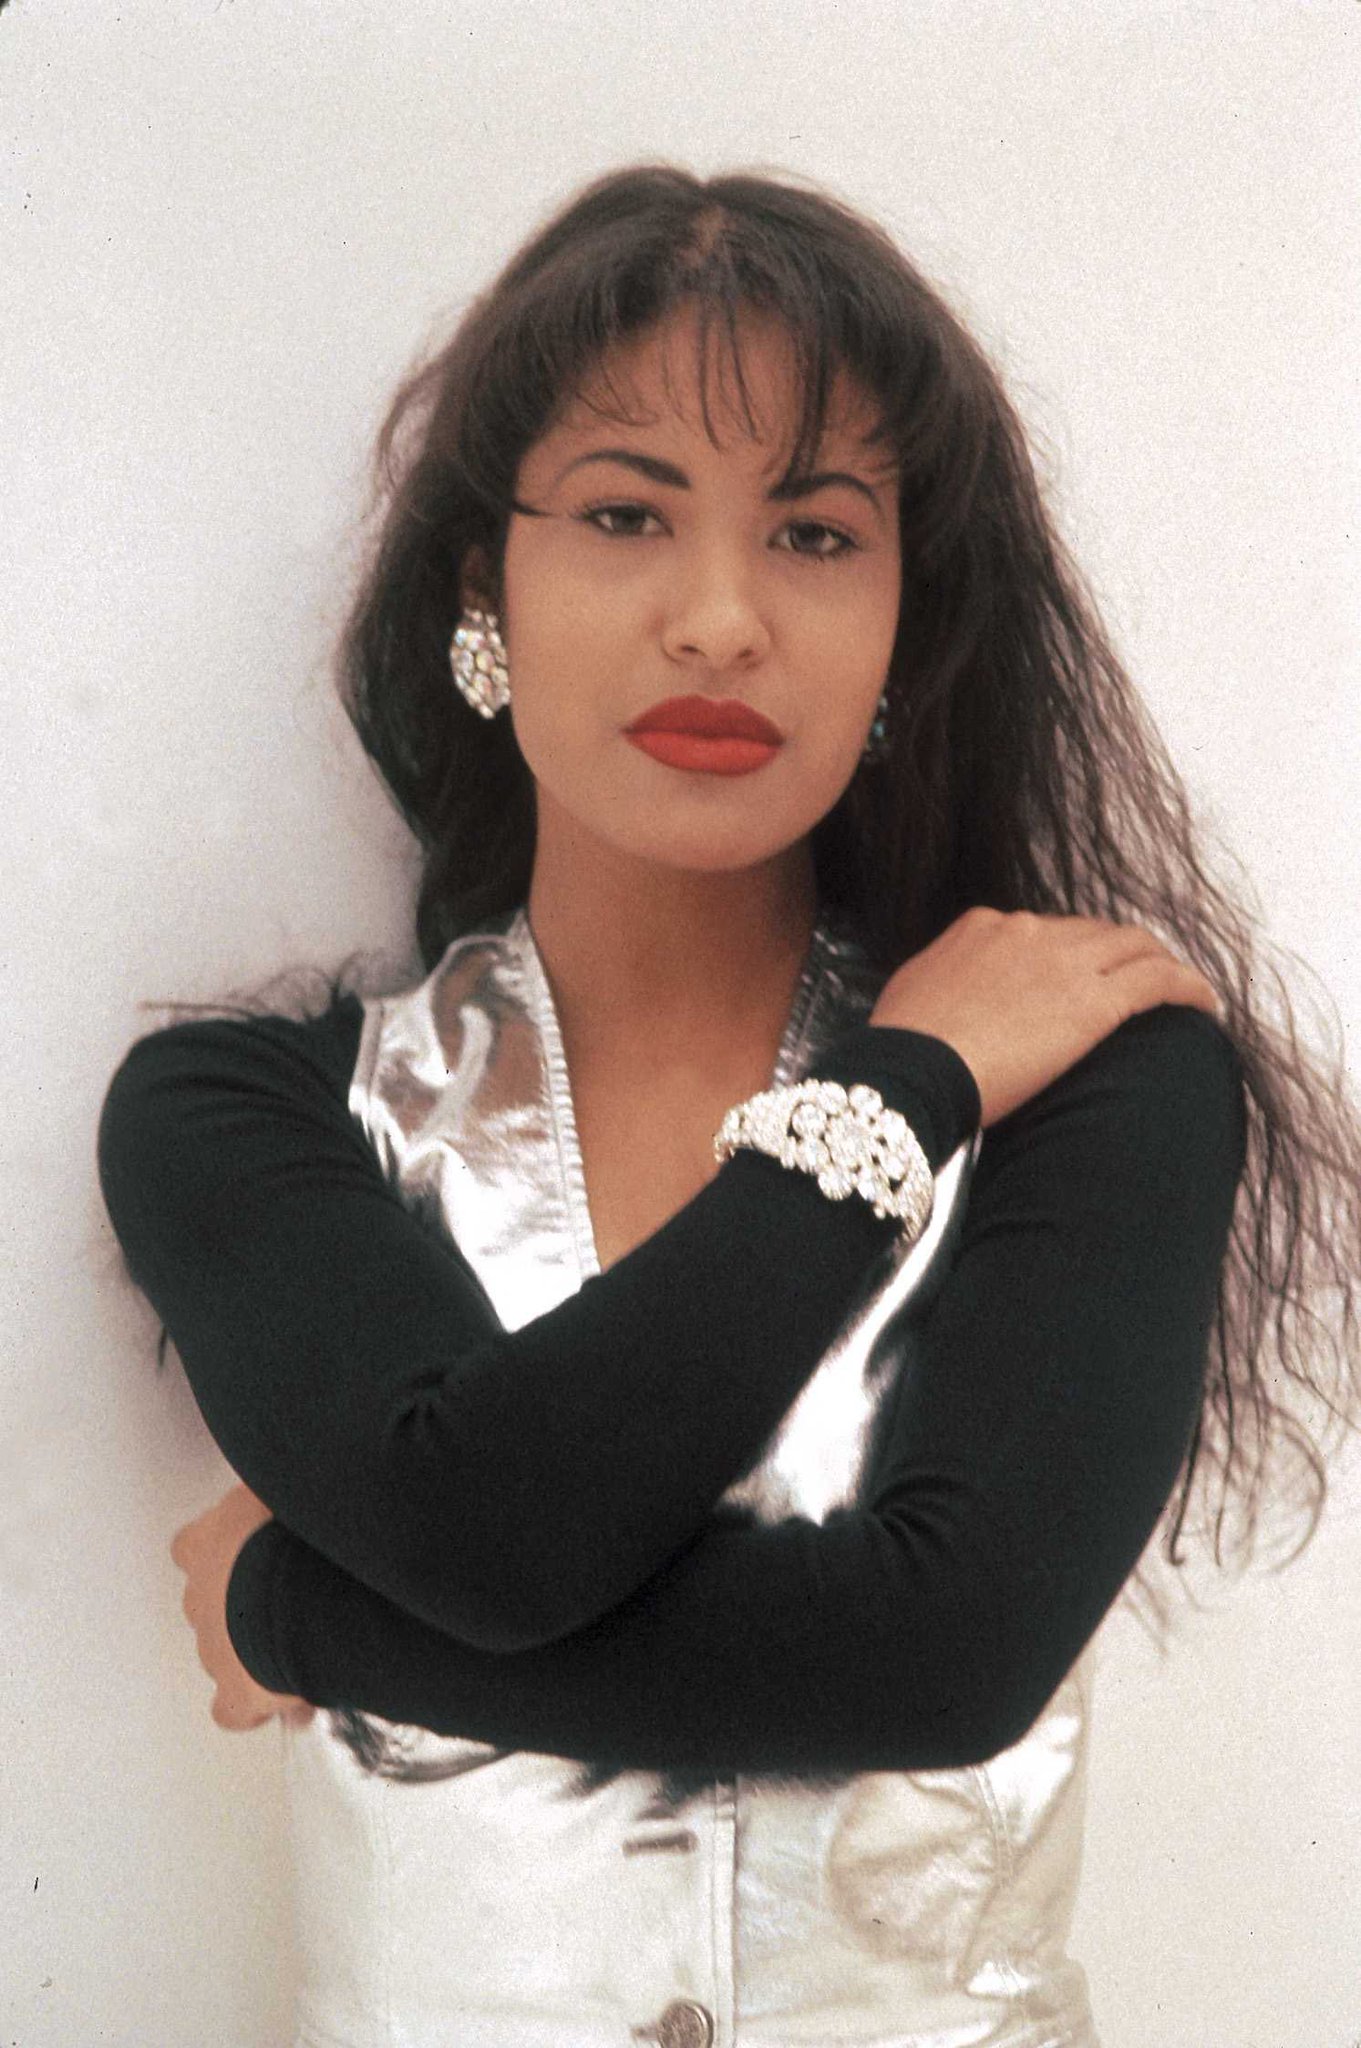 Happy Birthday Selena Quintanilla
who would of been 49 today   